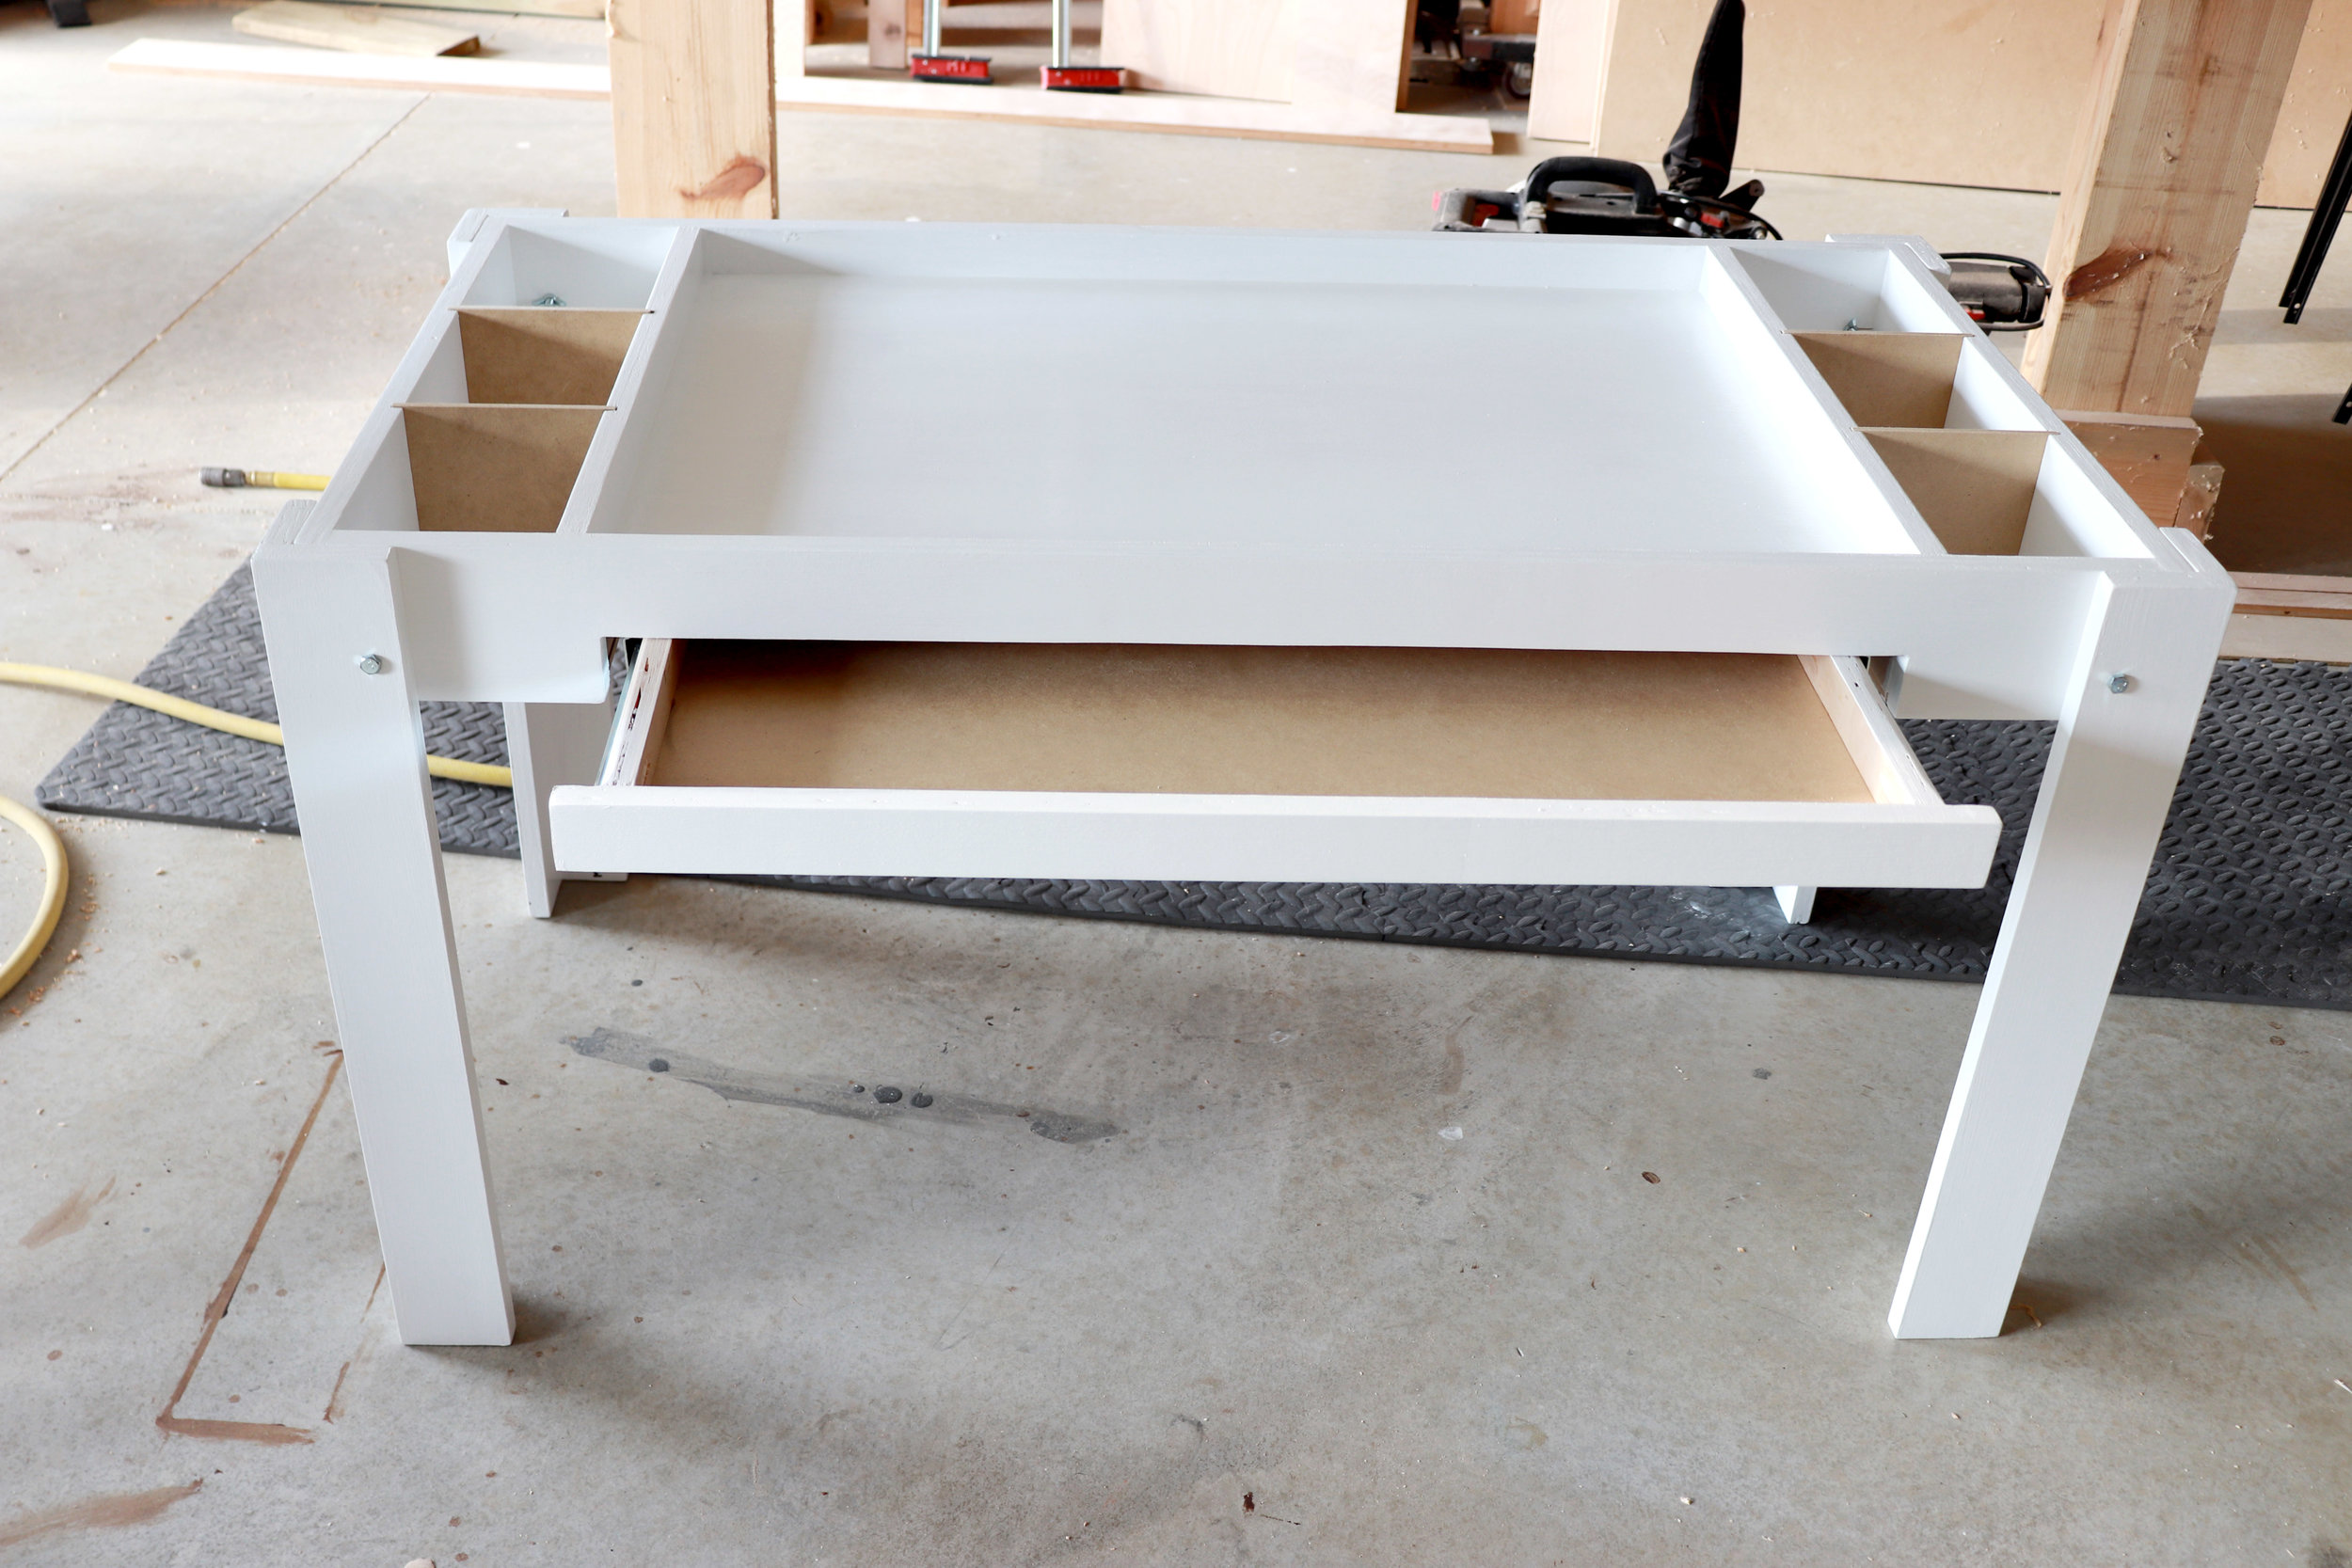 How To Build A Diy Lego Table Philip Miller Furniture